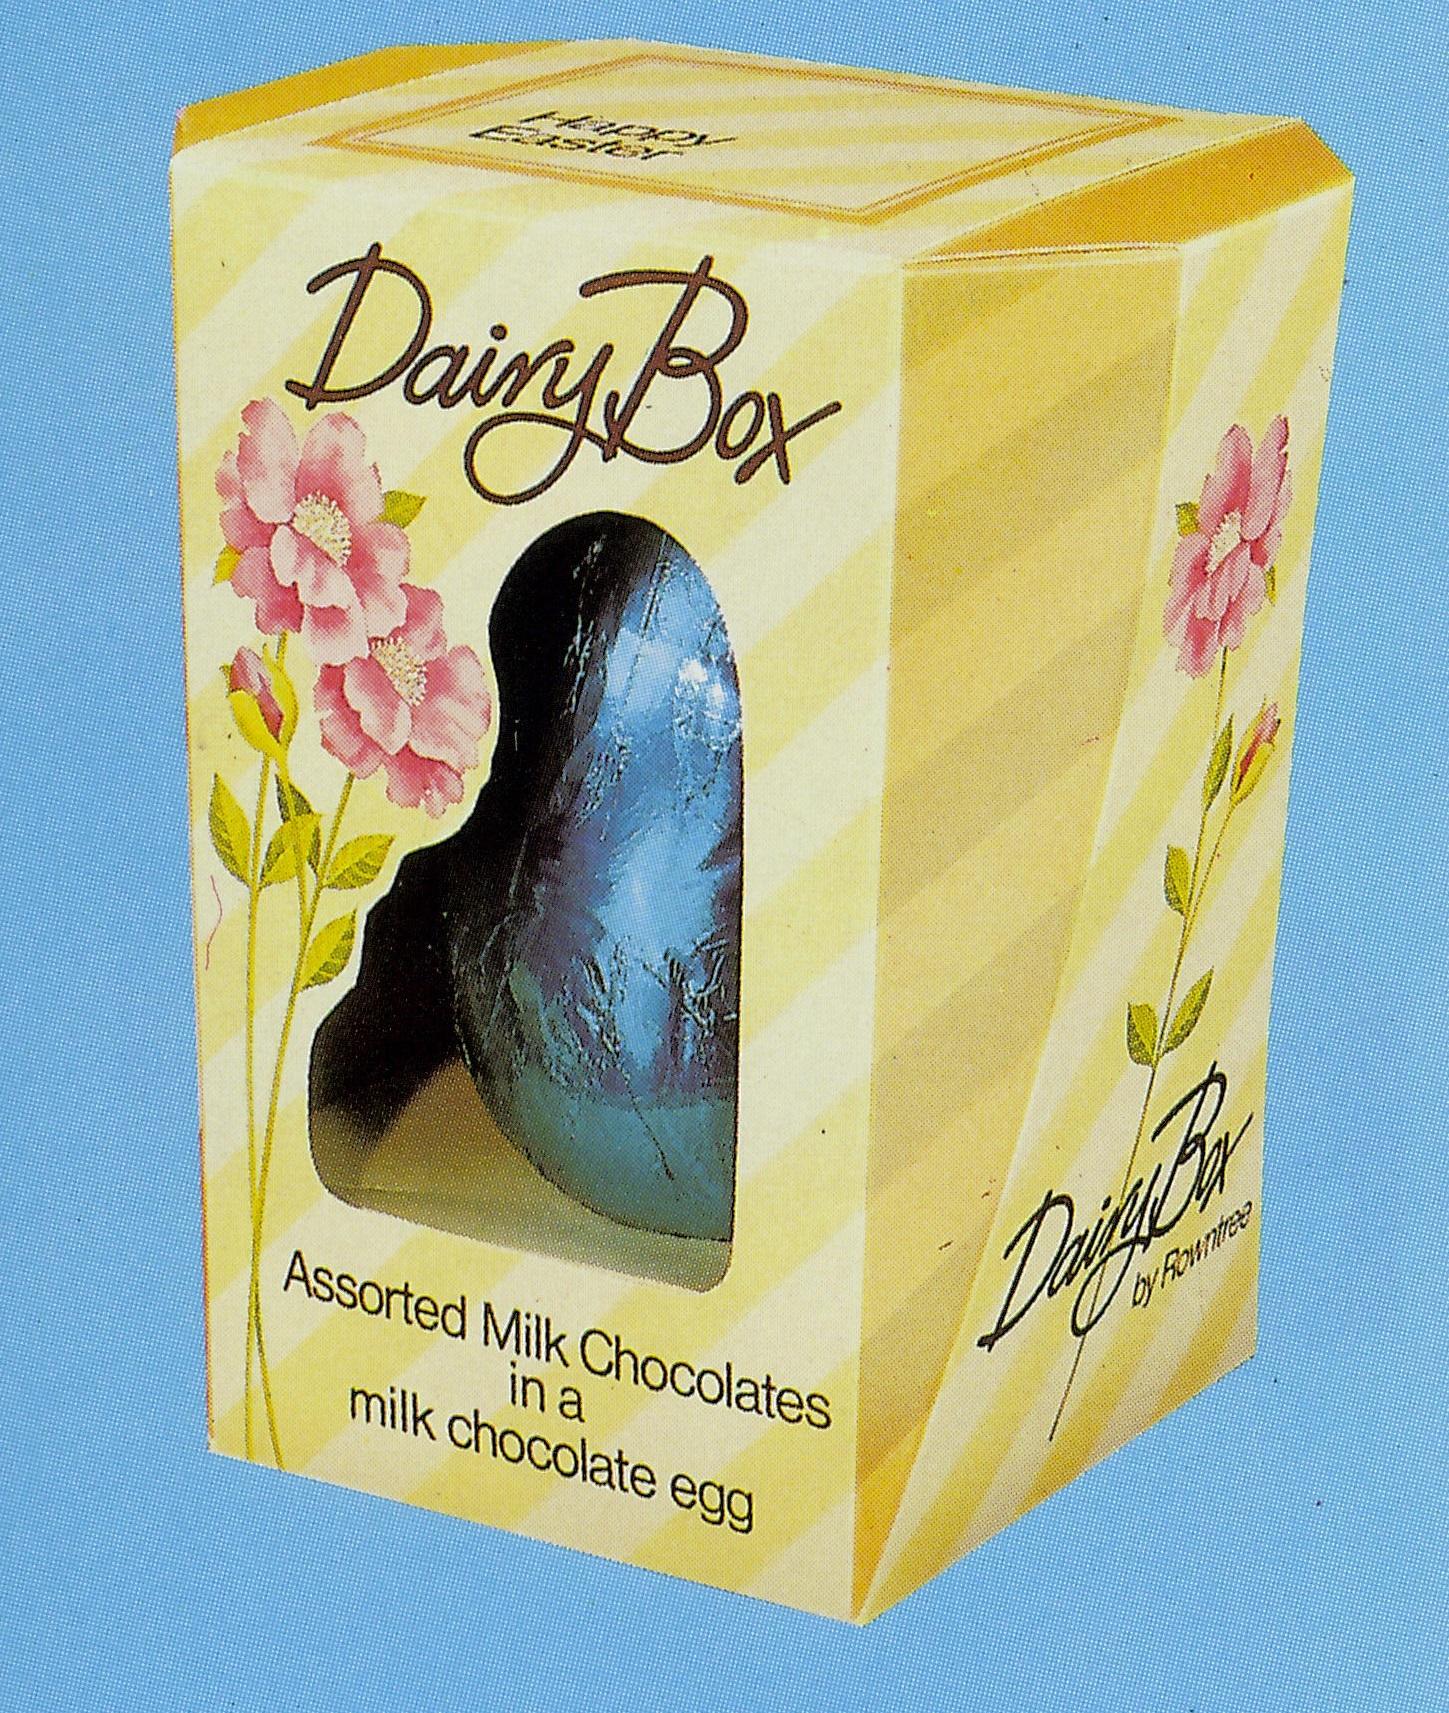 easter eggs in the 80s - Dairy Ber Assorted Milk Chocolates milk chocolate egg in a